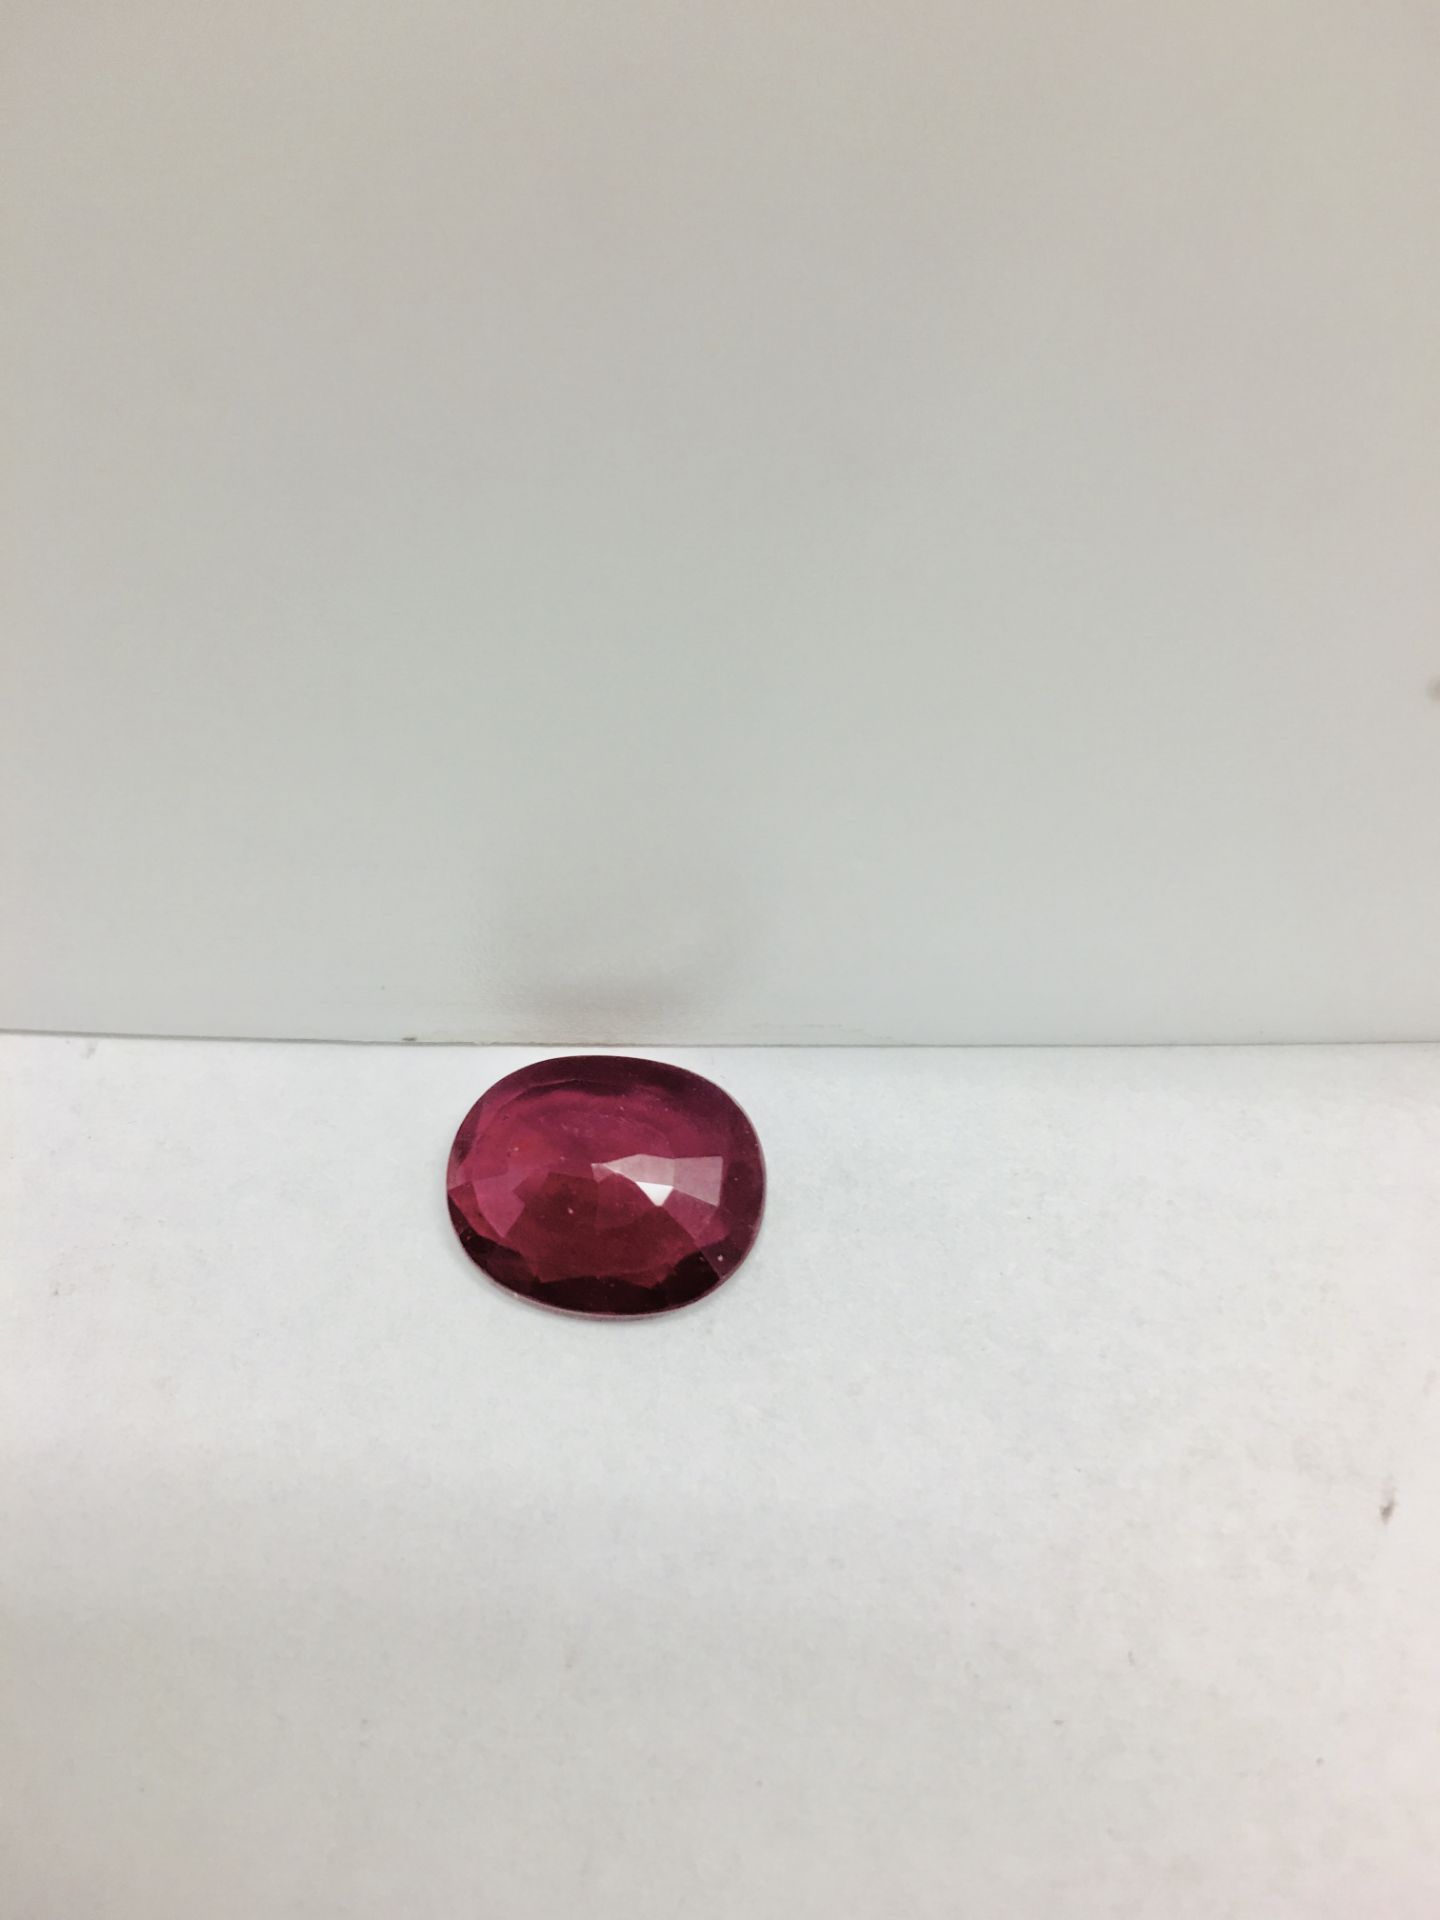 4.02ct ruby,Enhanced by Frature,good clarity and colour,12mmx10mm ,valued at 800 - Image 3 of 4